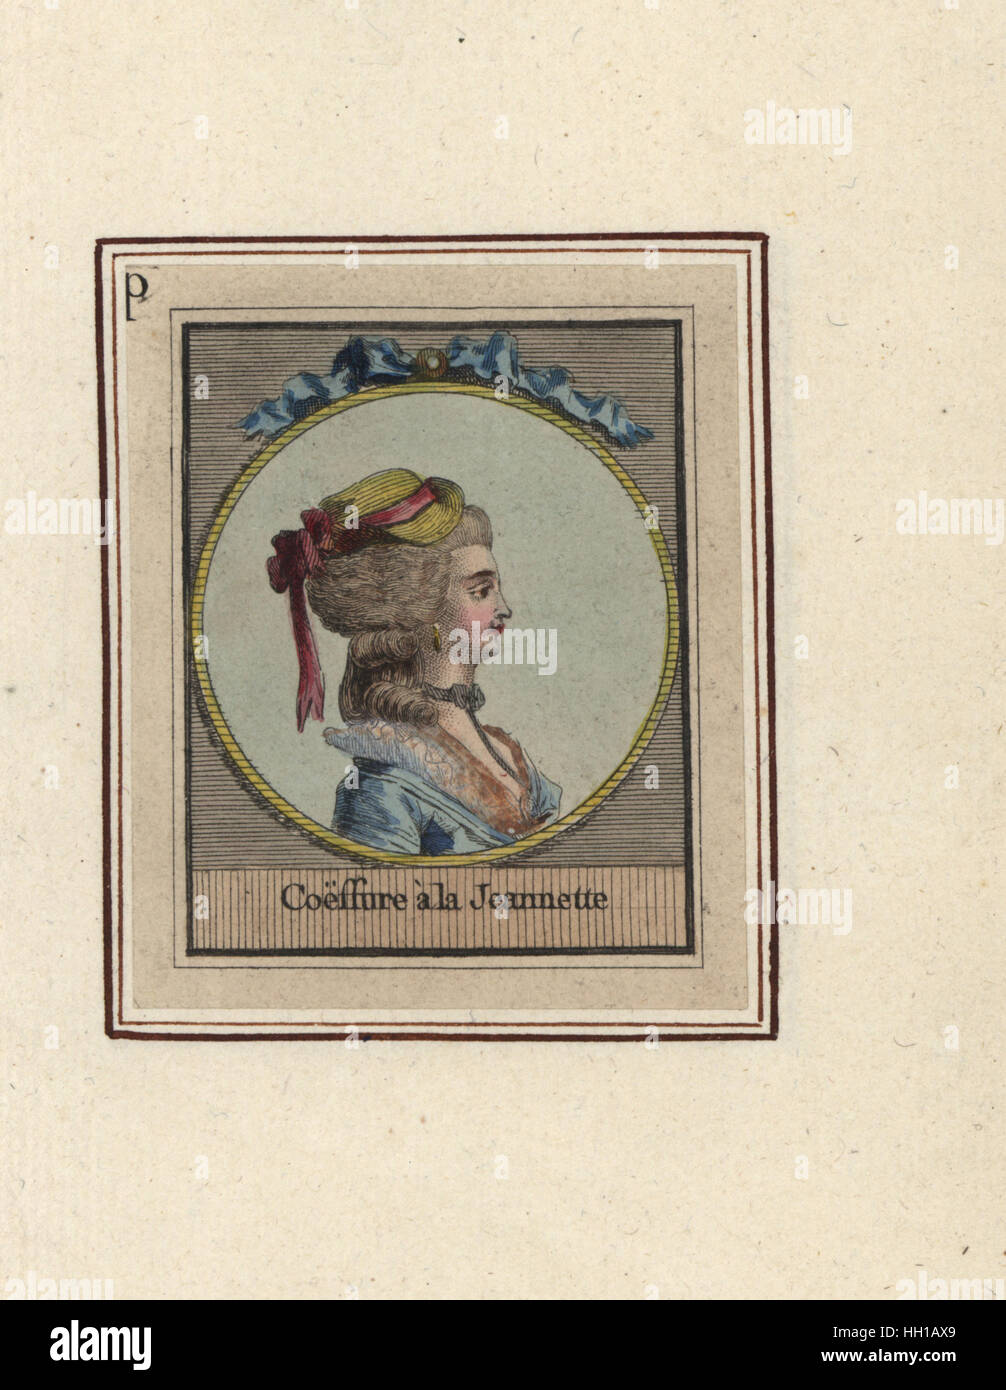 Woman in straw hat tied with a ribbon called the Jeannette. Coeffeur a la Jeannette. Handcoloured copperplate engraving by an unknown artist from an Album of Fashionable Hairstyles of 1783, Suite des Coeffures a la Mode en 1783, Esnauts et Rapilly, Paris, 1783. Stock Photo